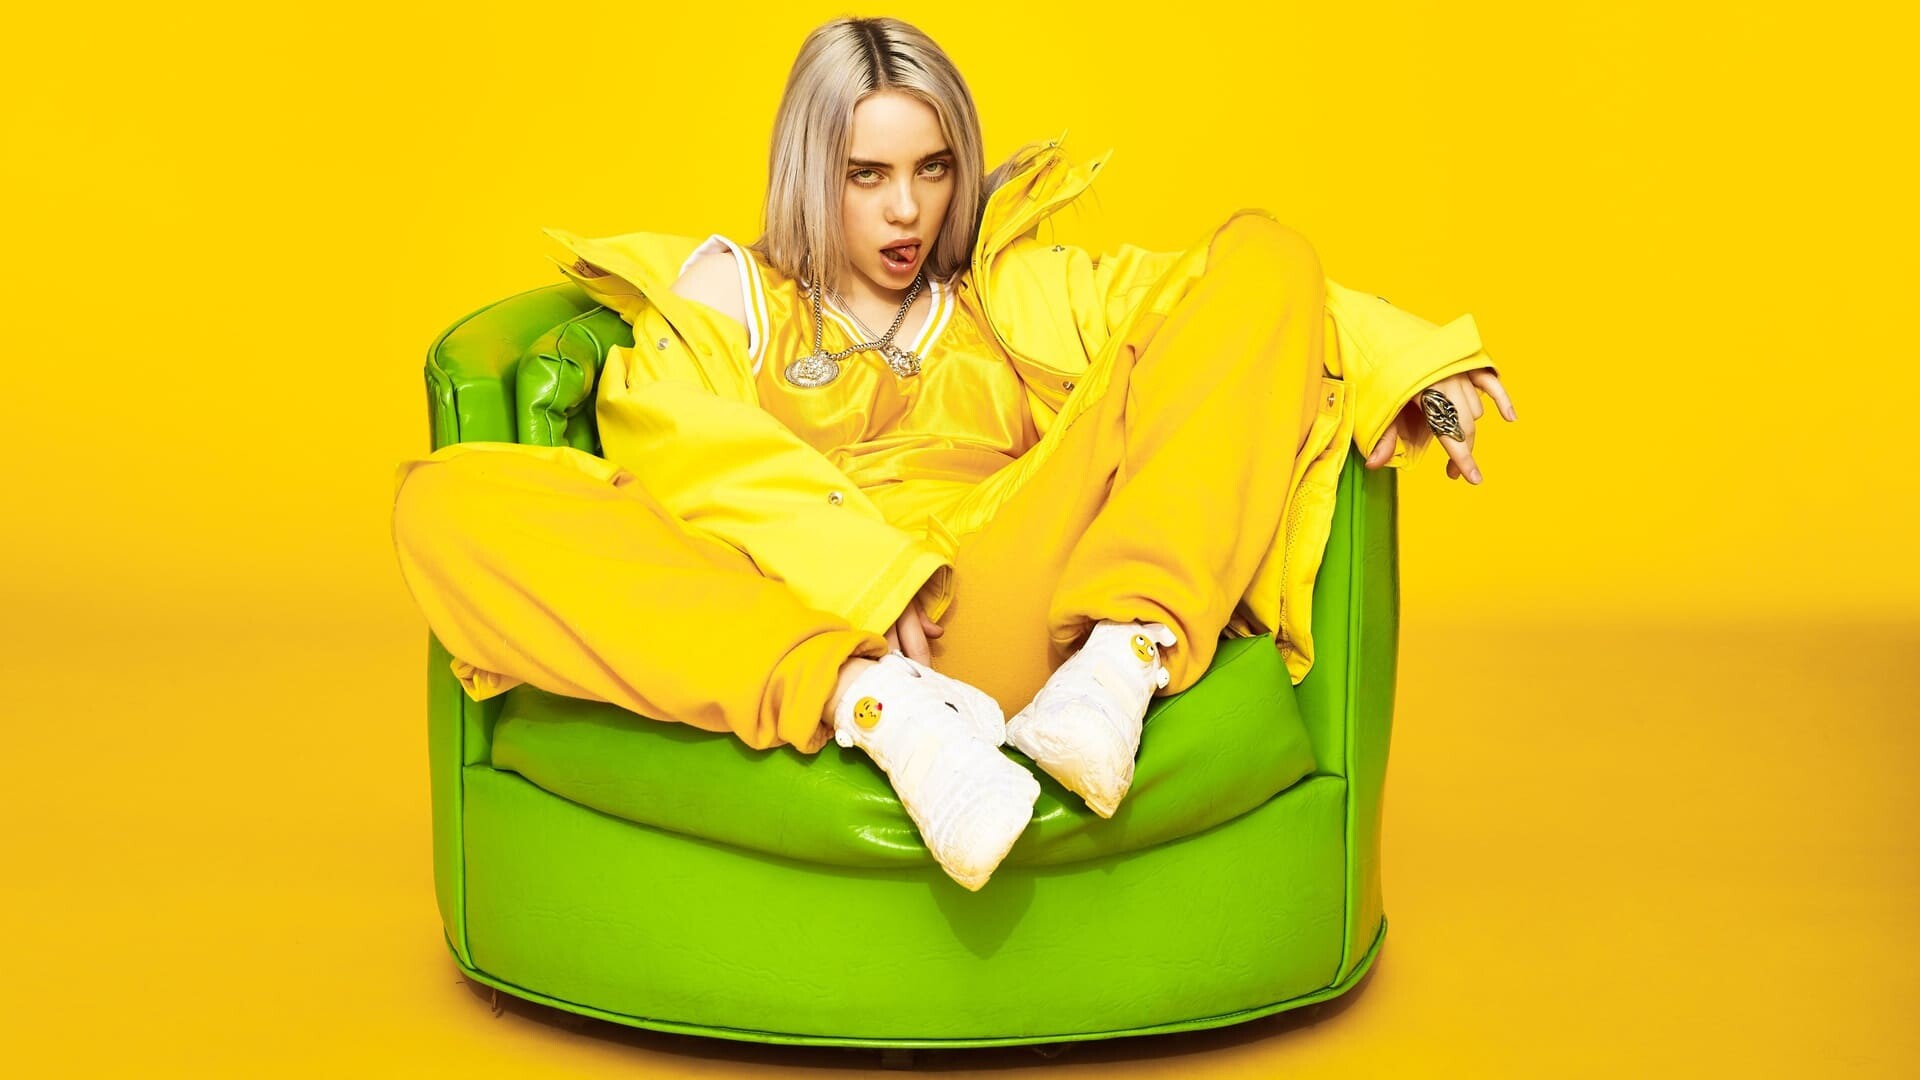 Billie Eilish: When We All Fall Asleep, Where Do We Go?, The highest-selling debut album of 2019. 1920x1080 Full HD Background.